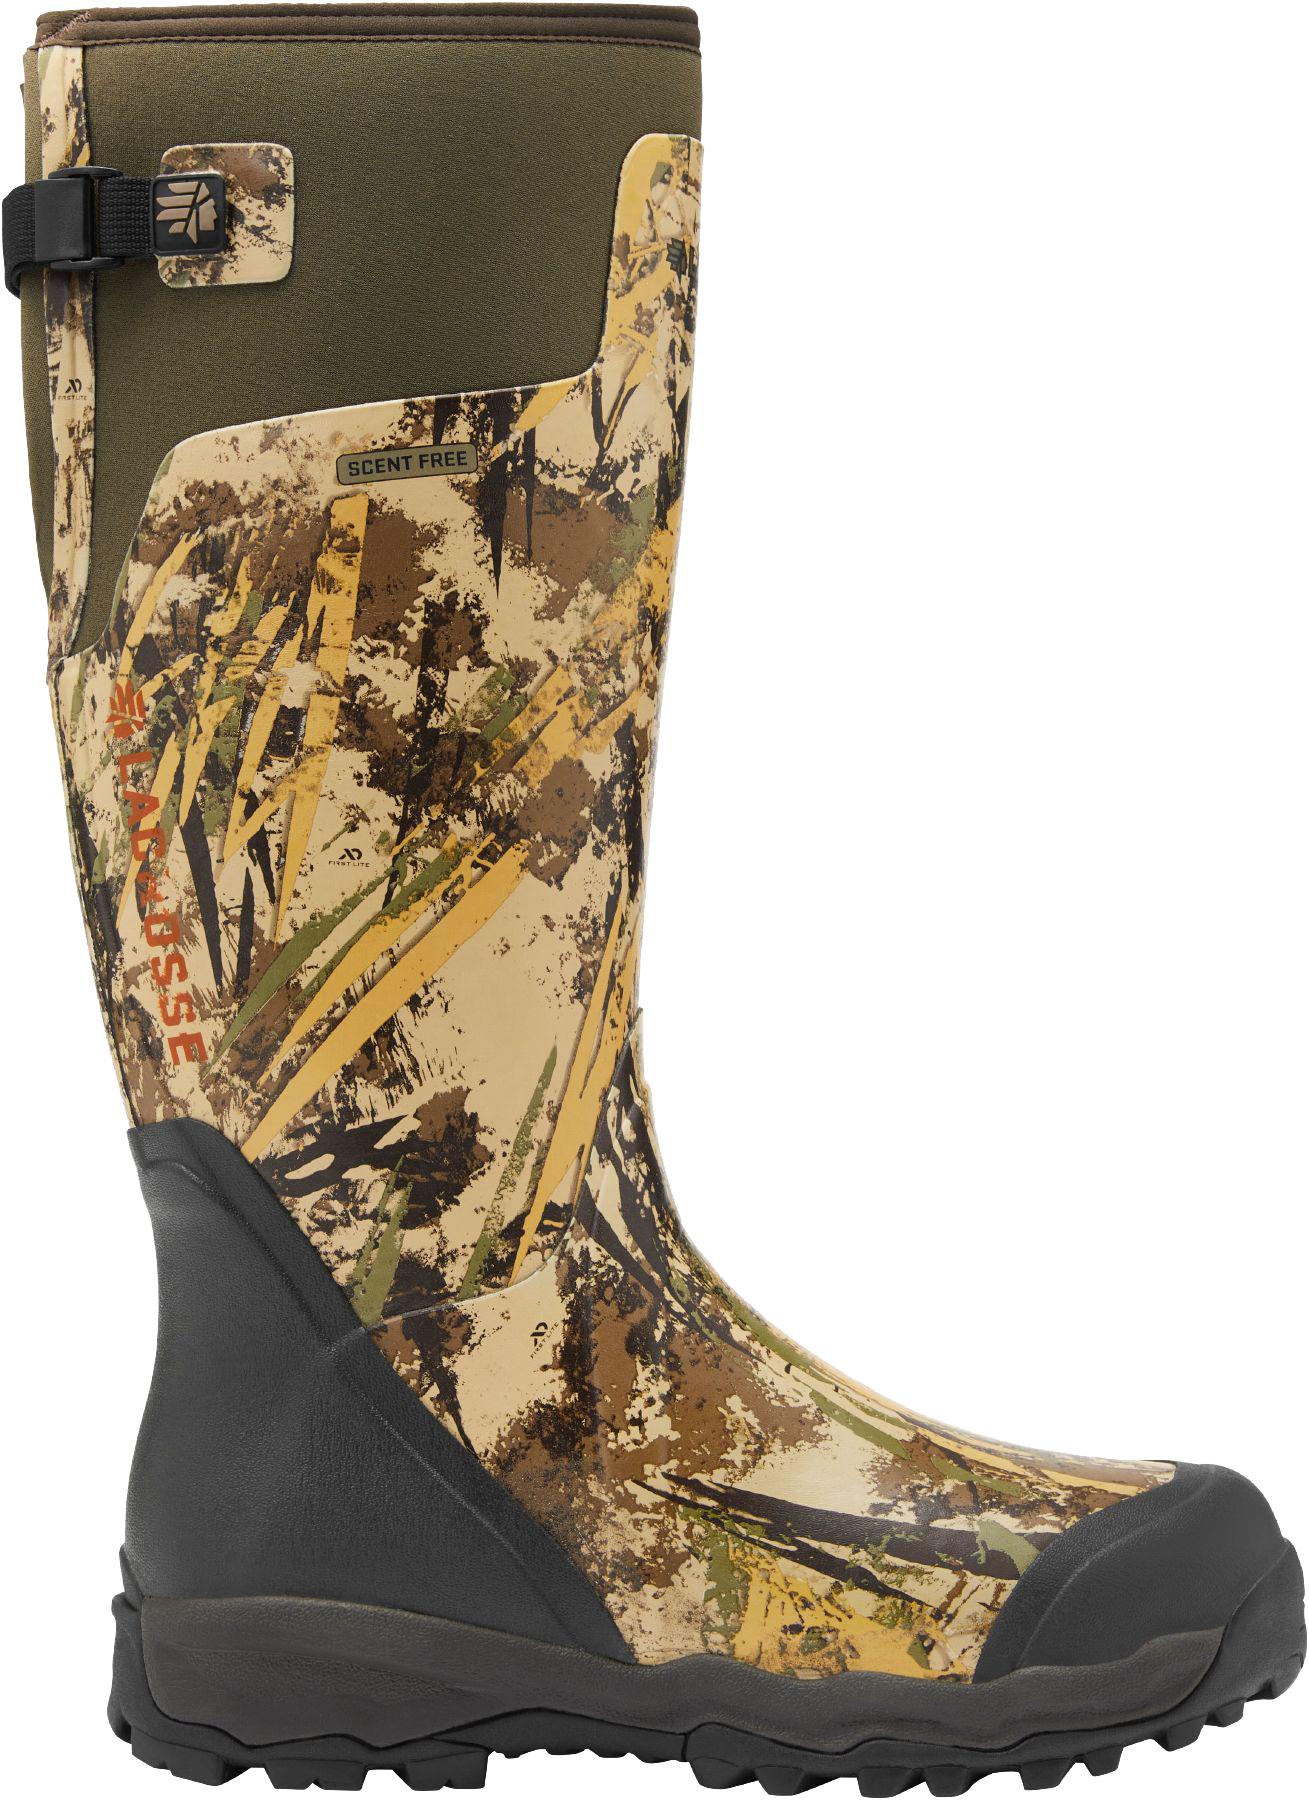 LaCrosse AlphaBurly Pro Hunting Boots for Men - First Lite Typha - 12M